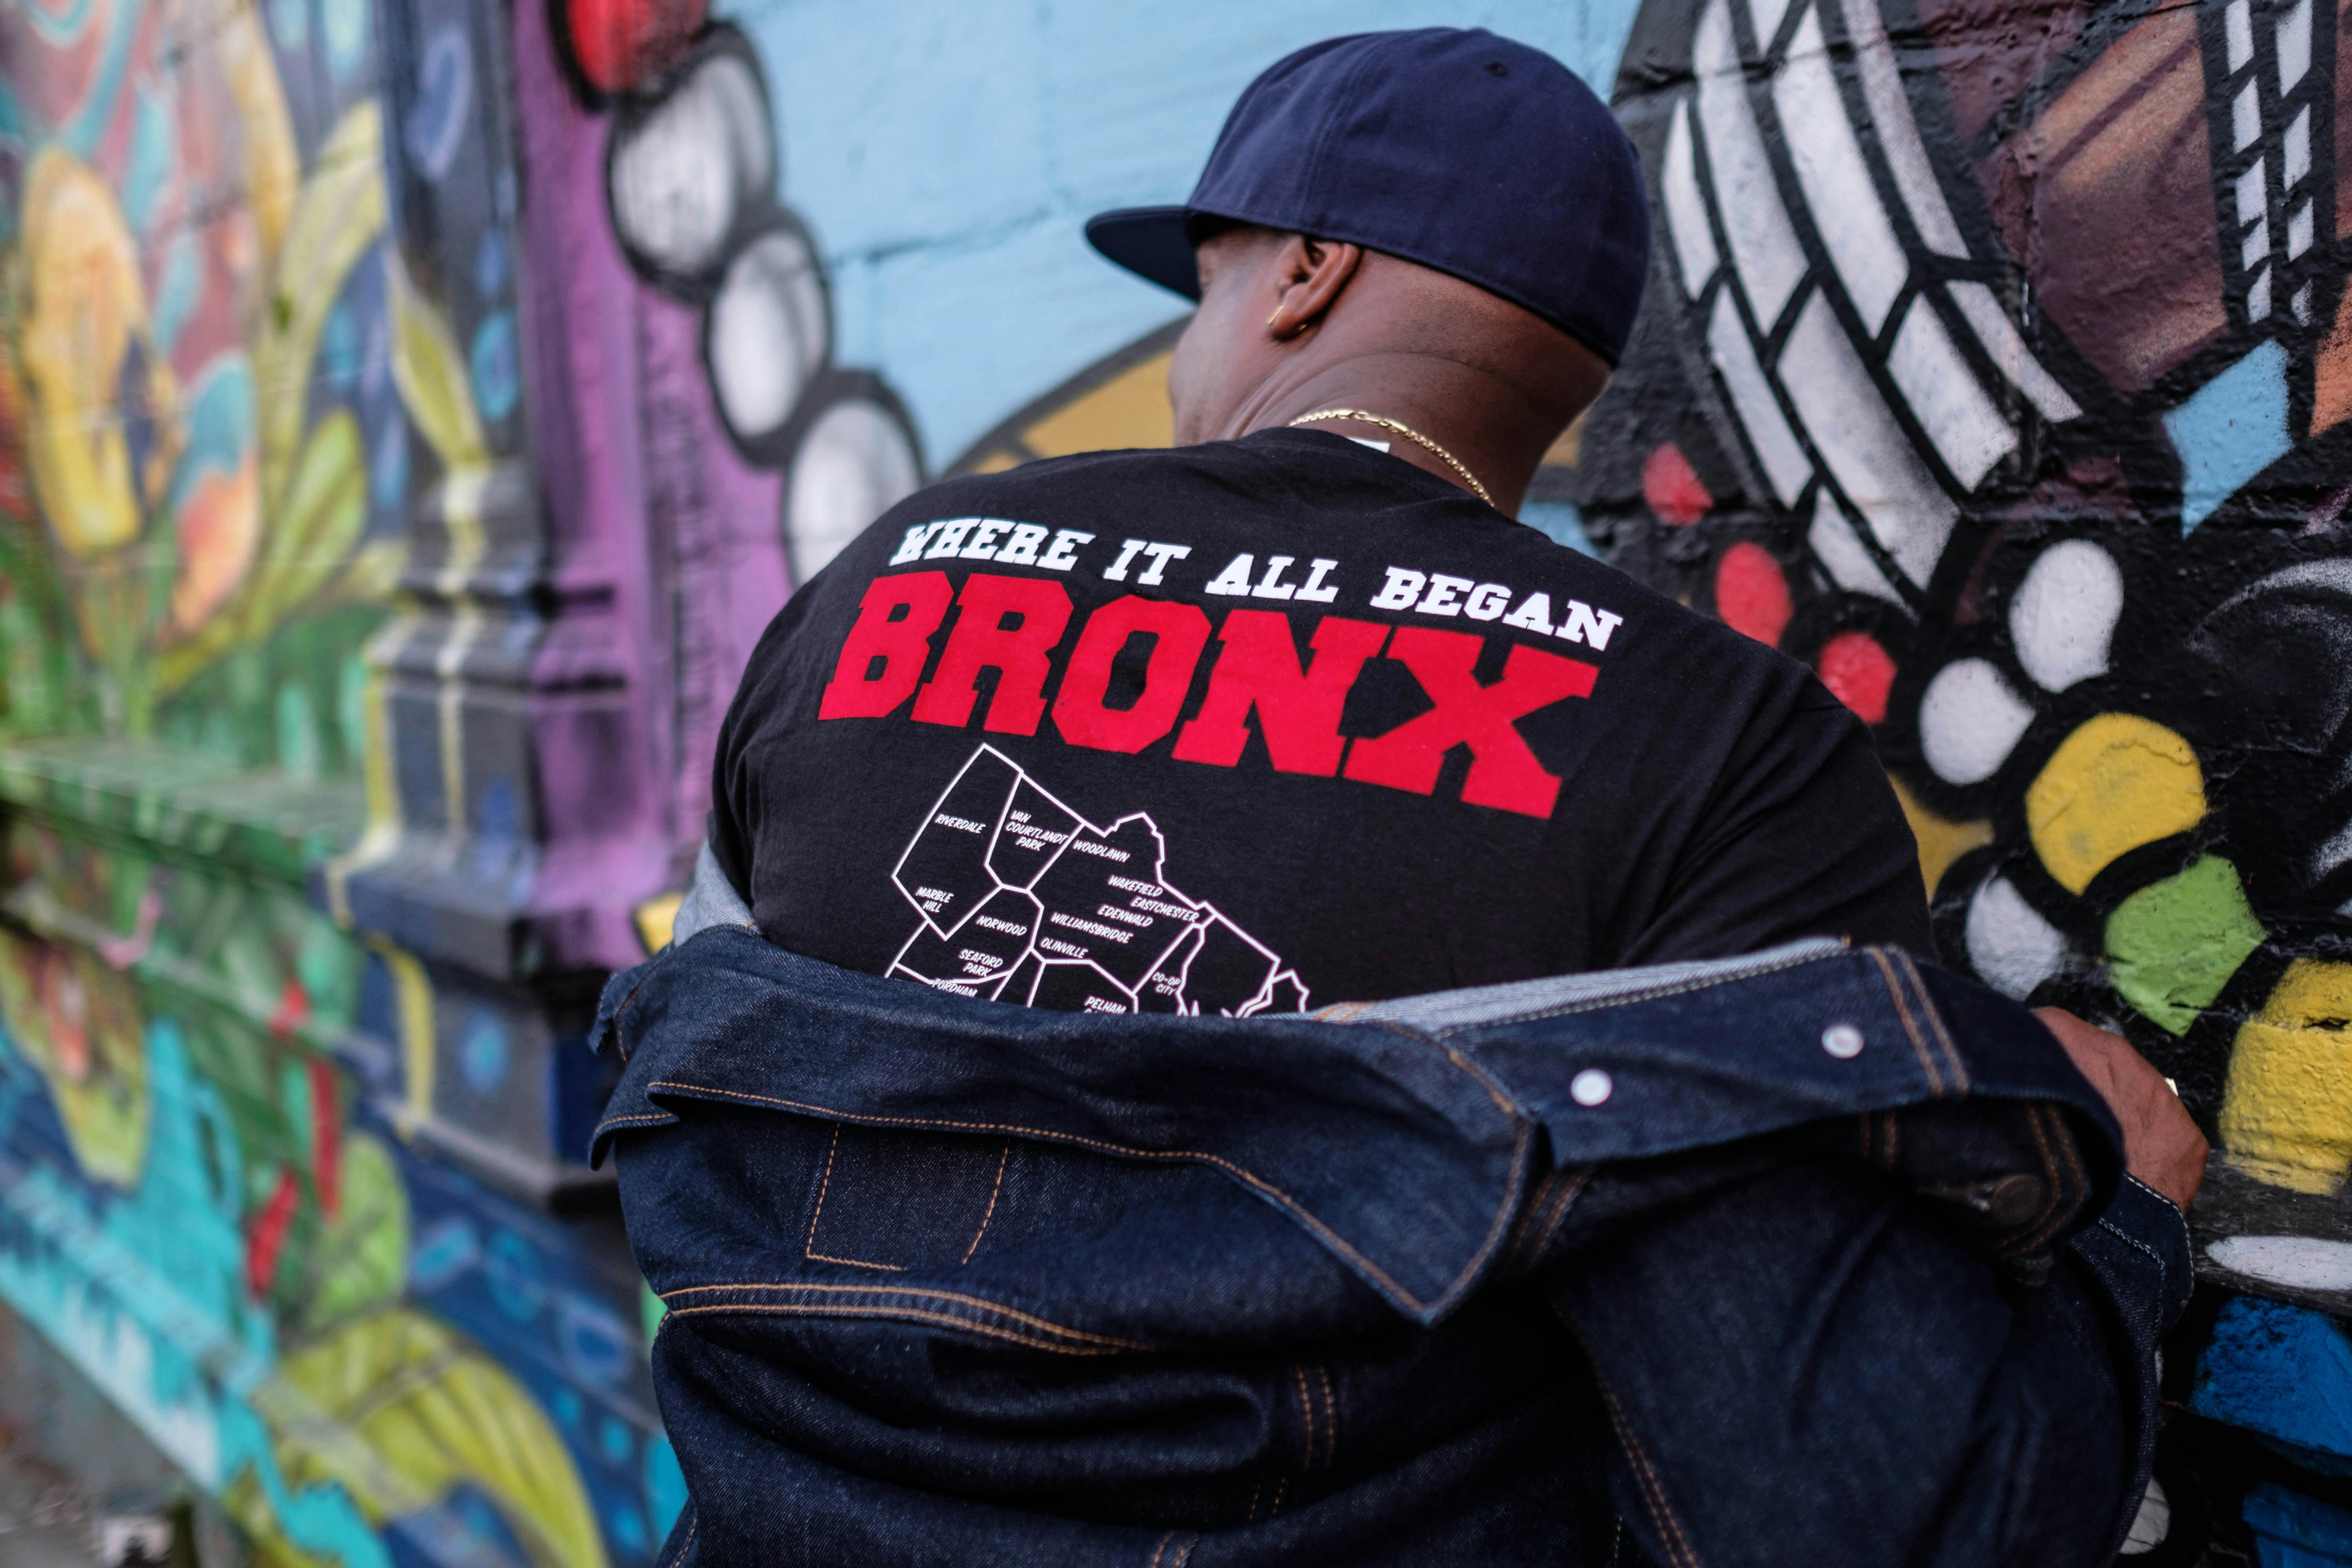 Grandmaster Flash poses with his back turned.